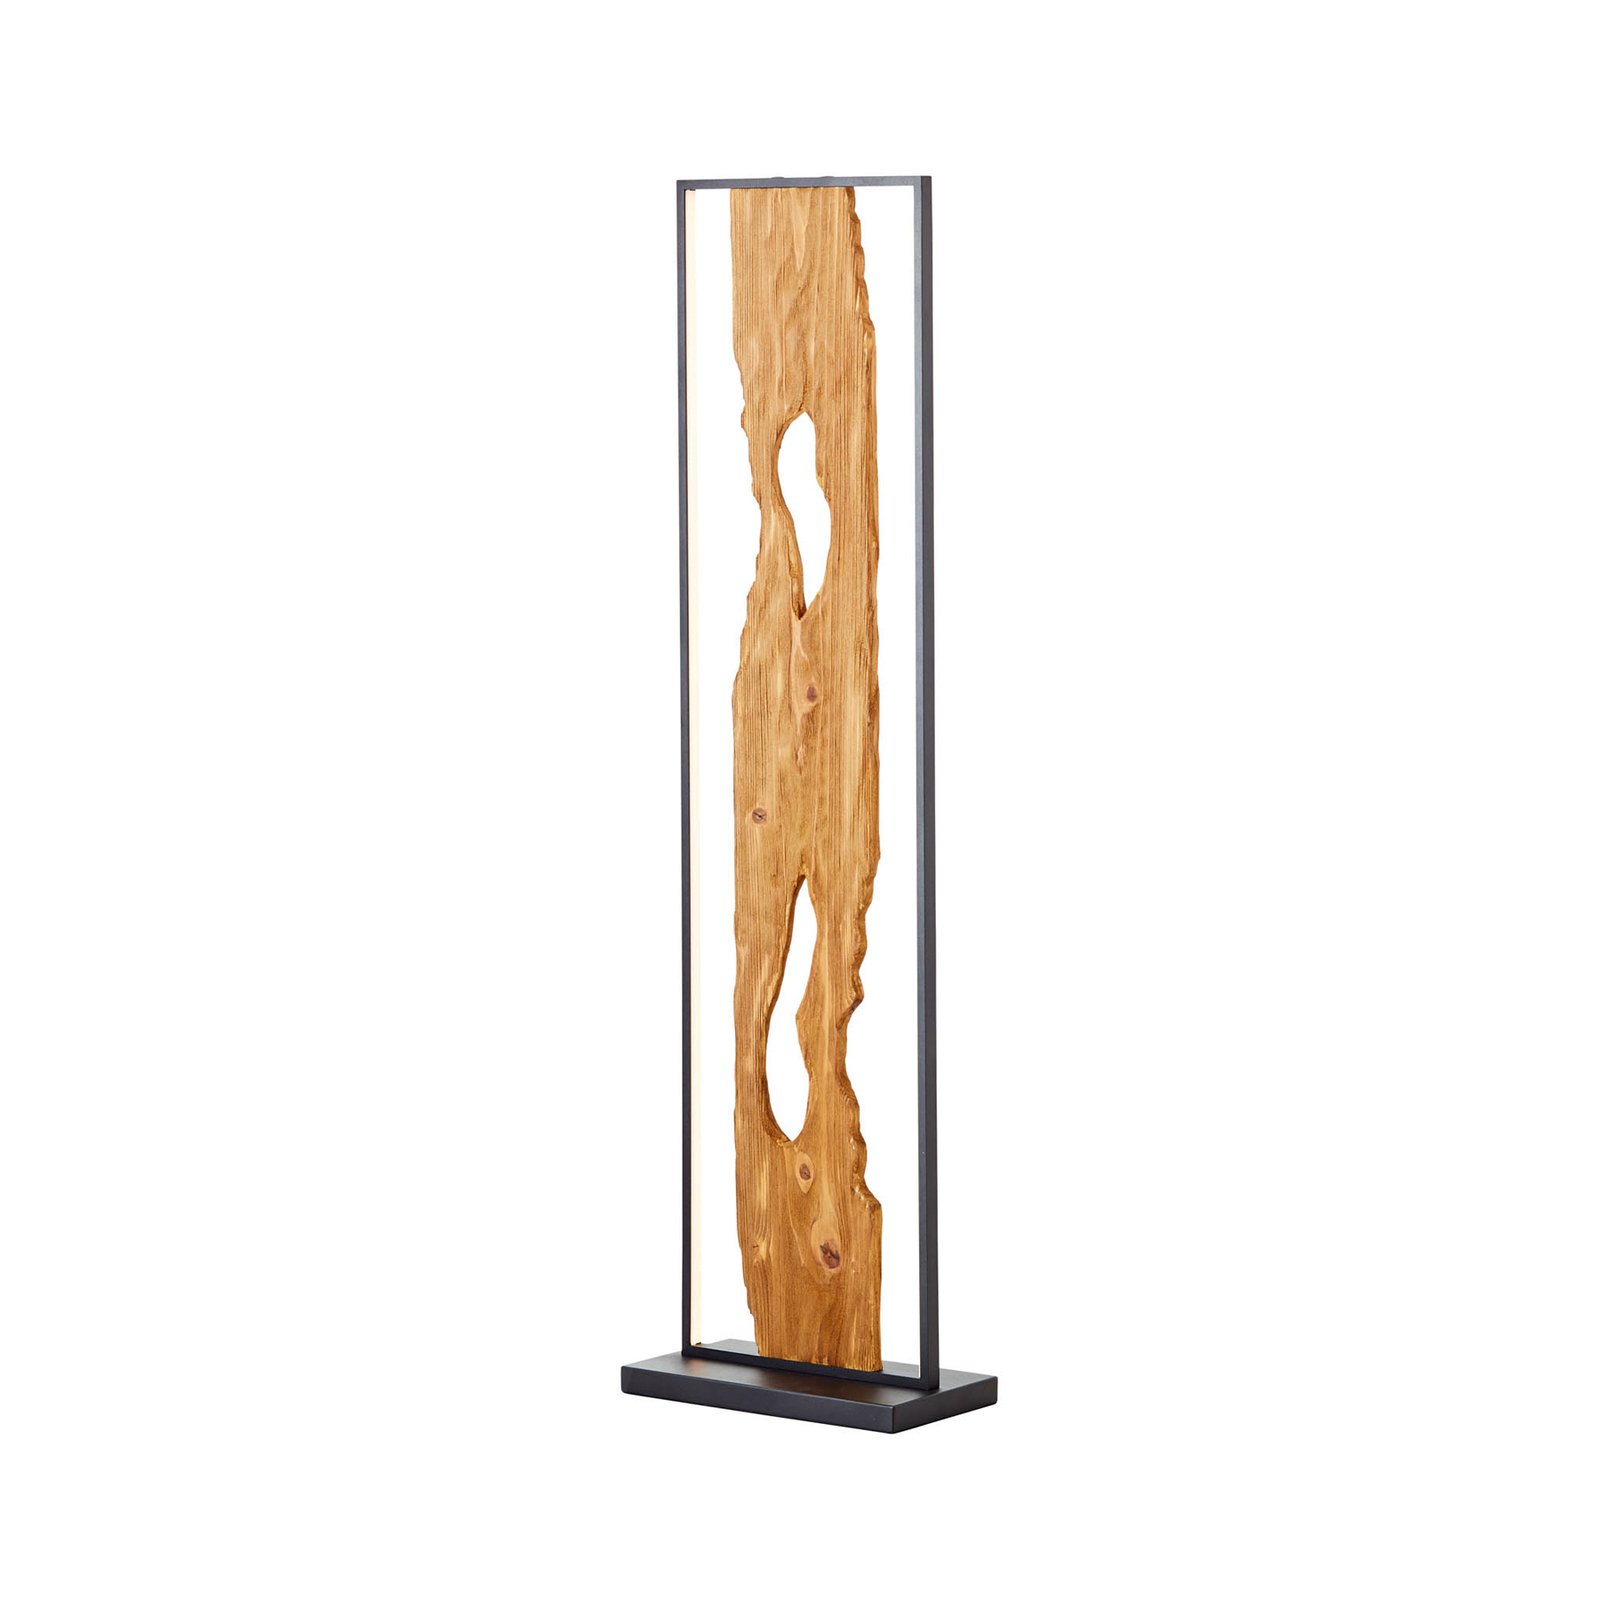 Chaumont LED floor lamp made of wood